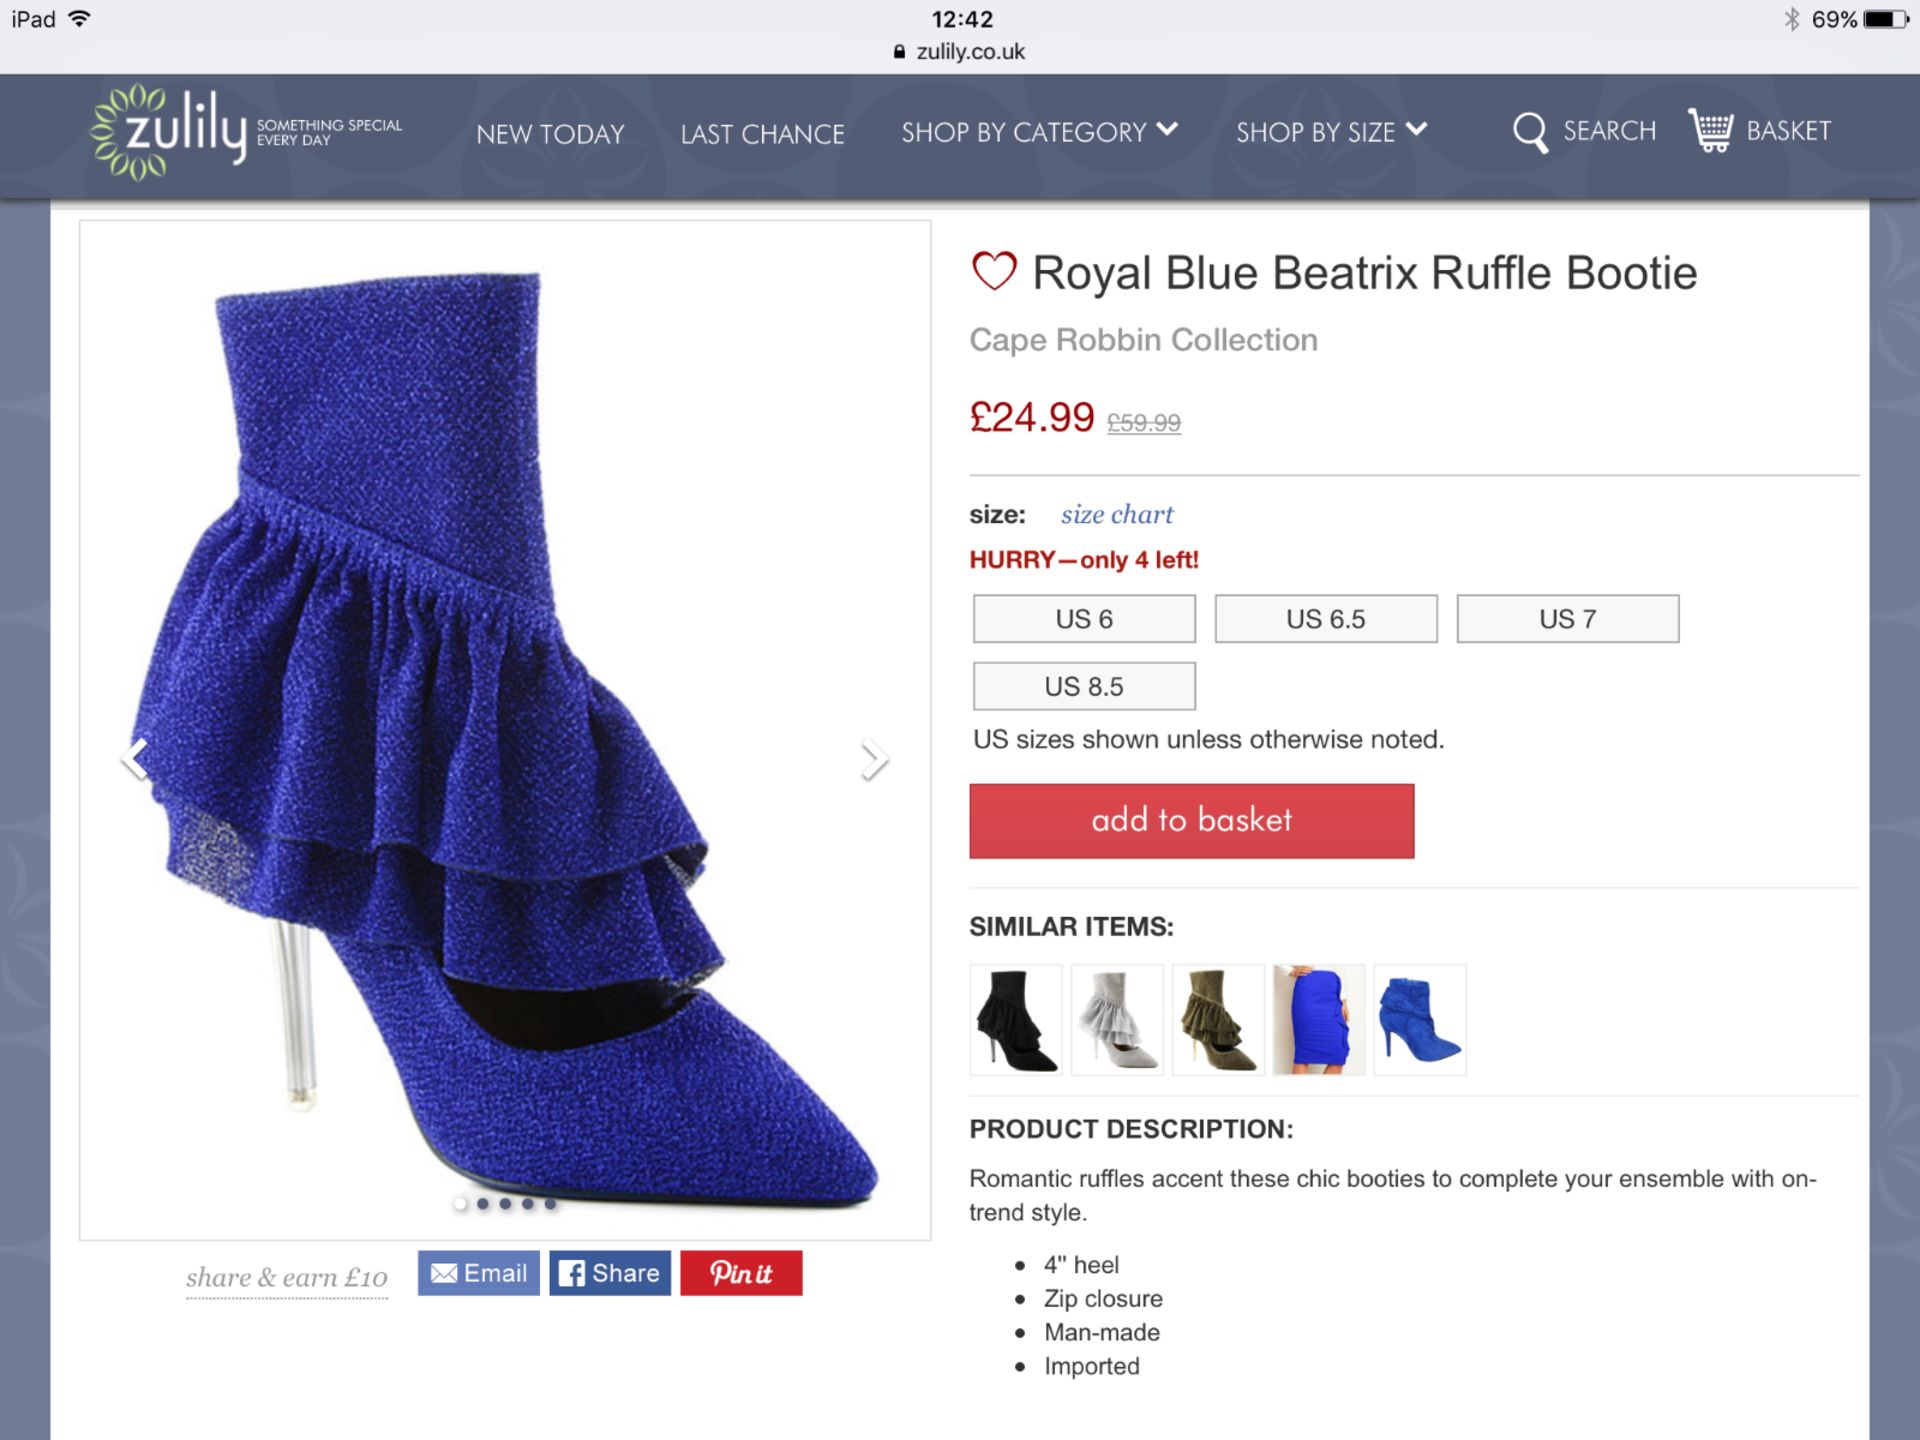 Cape Robbin Collection Royal Blue Beatrix Ruffle Boot, Size Eur 39, Rrp £59.99 (New With Box) [ - Image 6 of 7